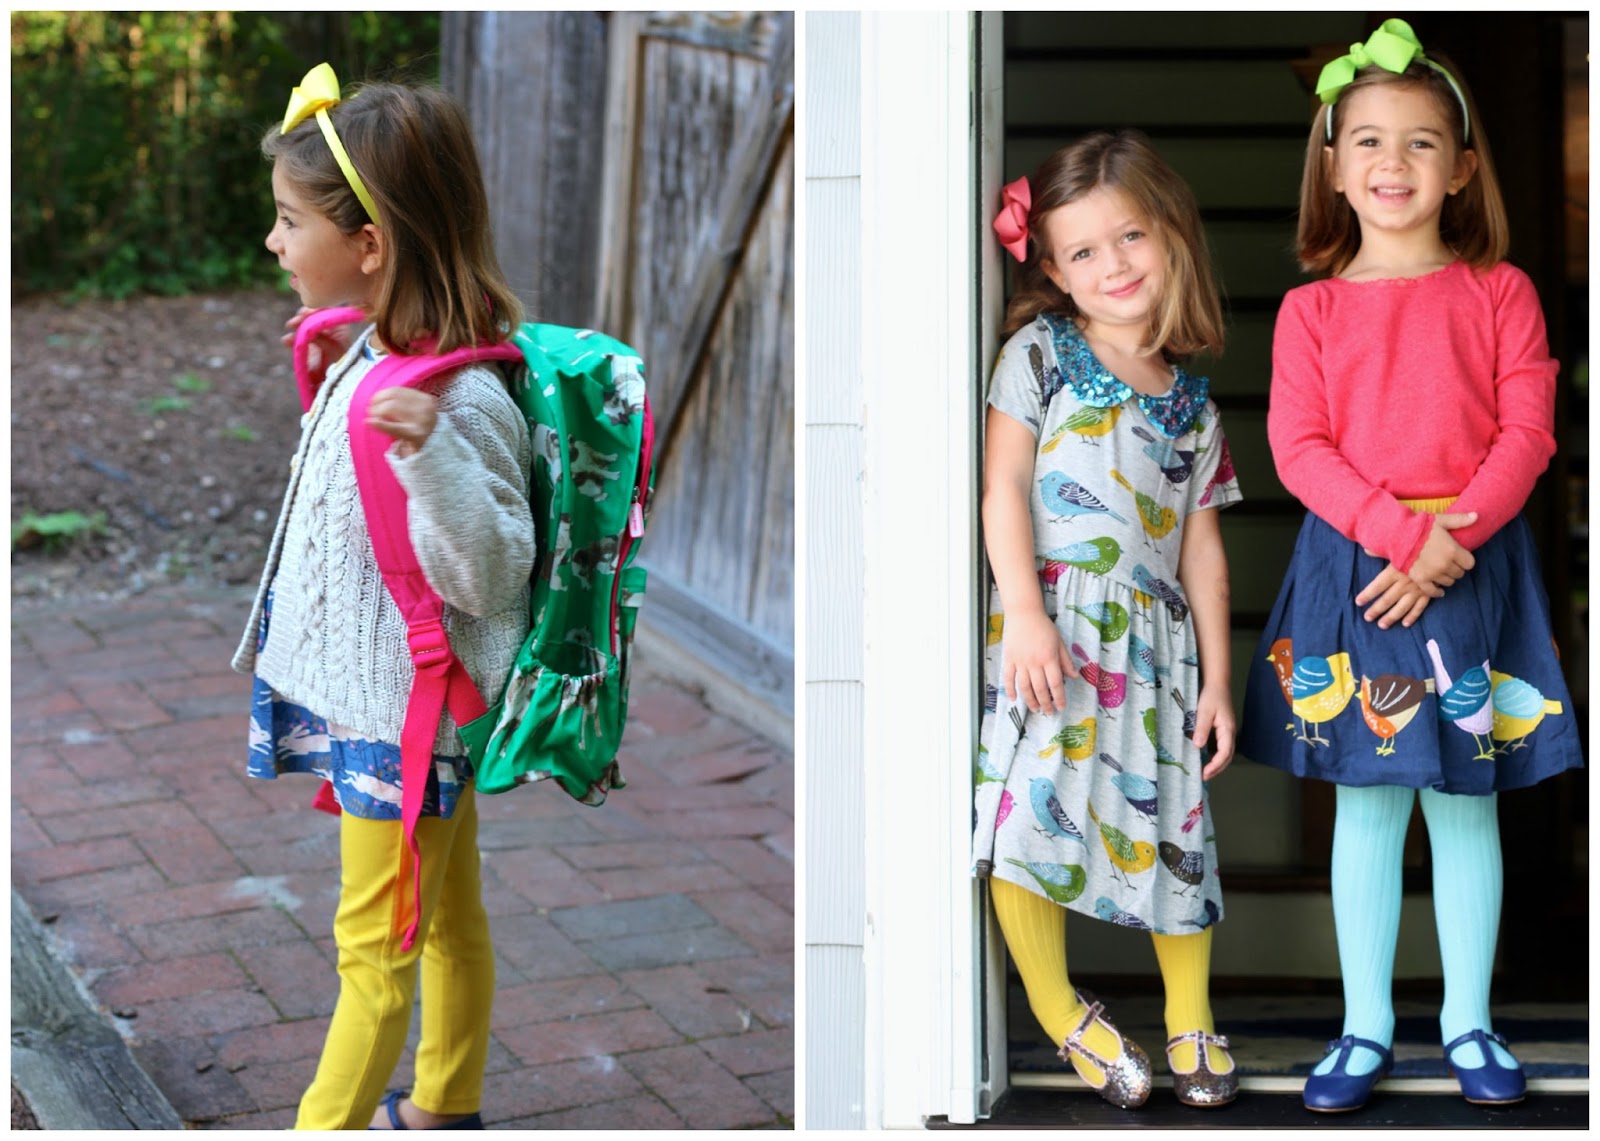 Our Favorite Mix & Match School Styles for & Girls - The Chirping Moms